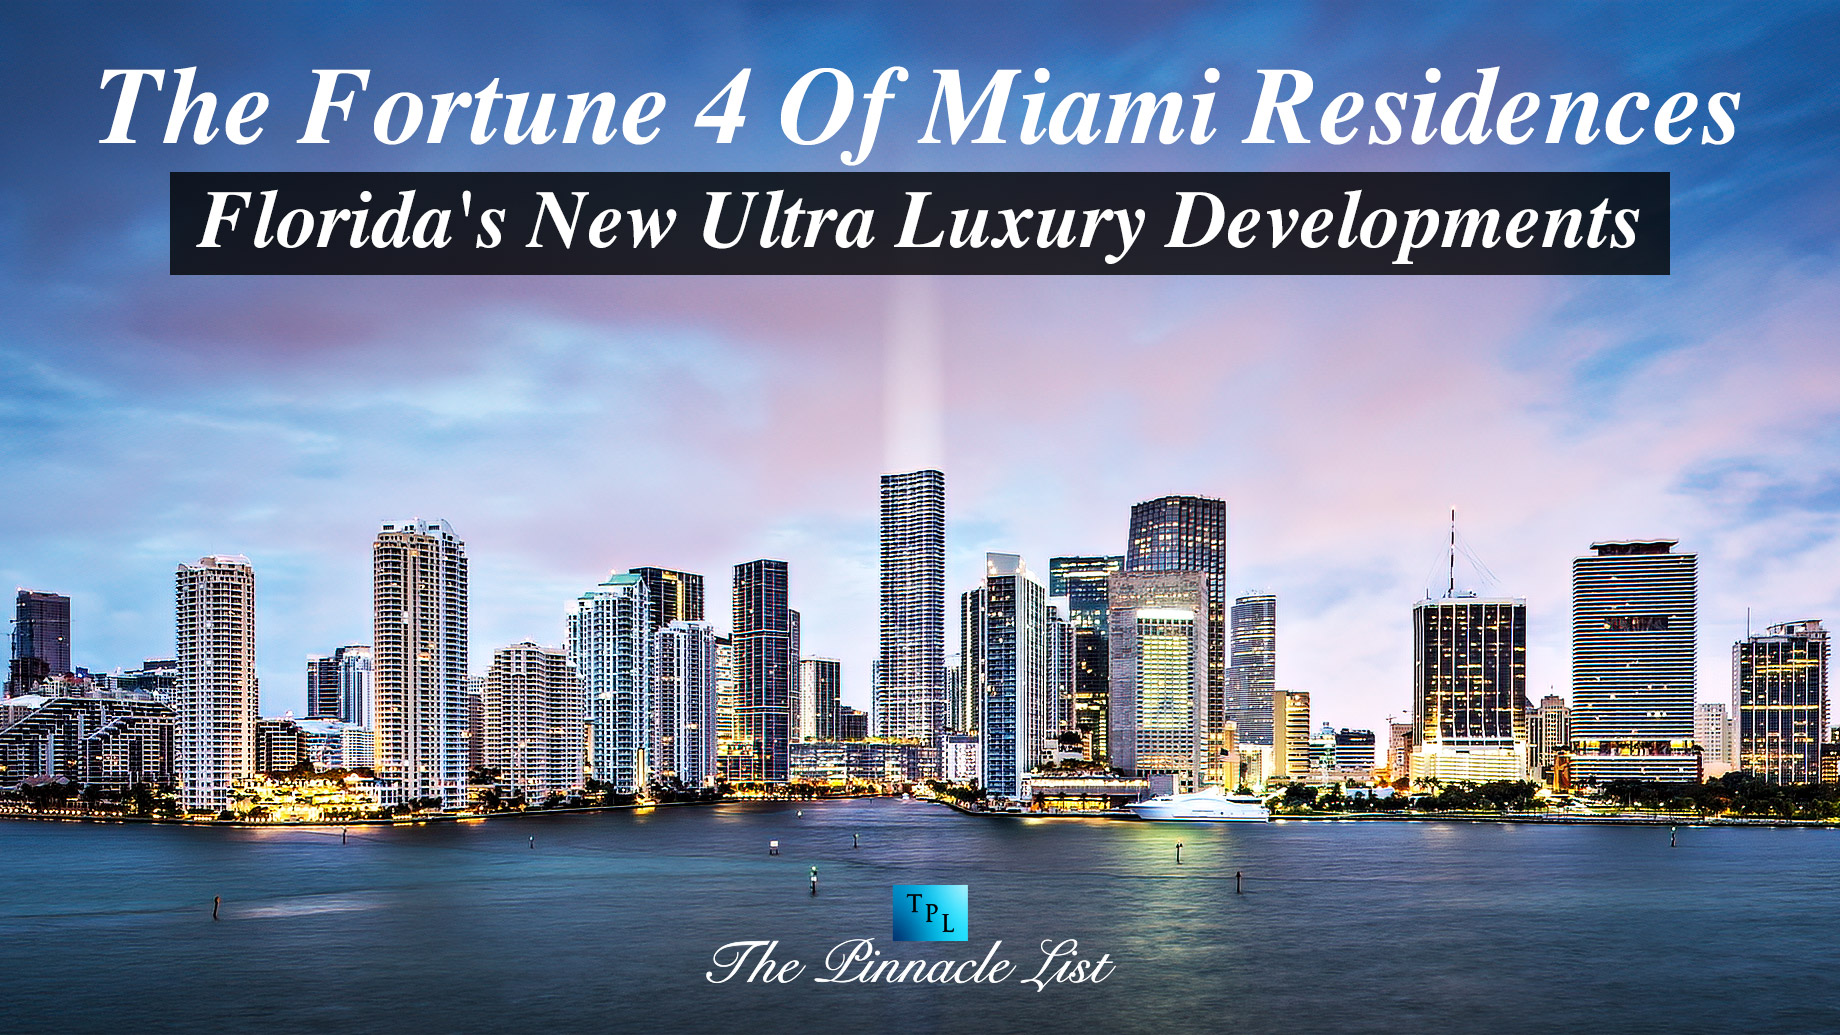 The Fortune 4 Of Miami Residences – Florida’s New Ultra Luxury Developments